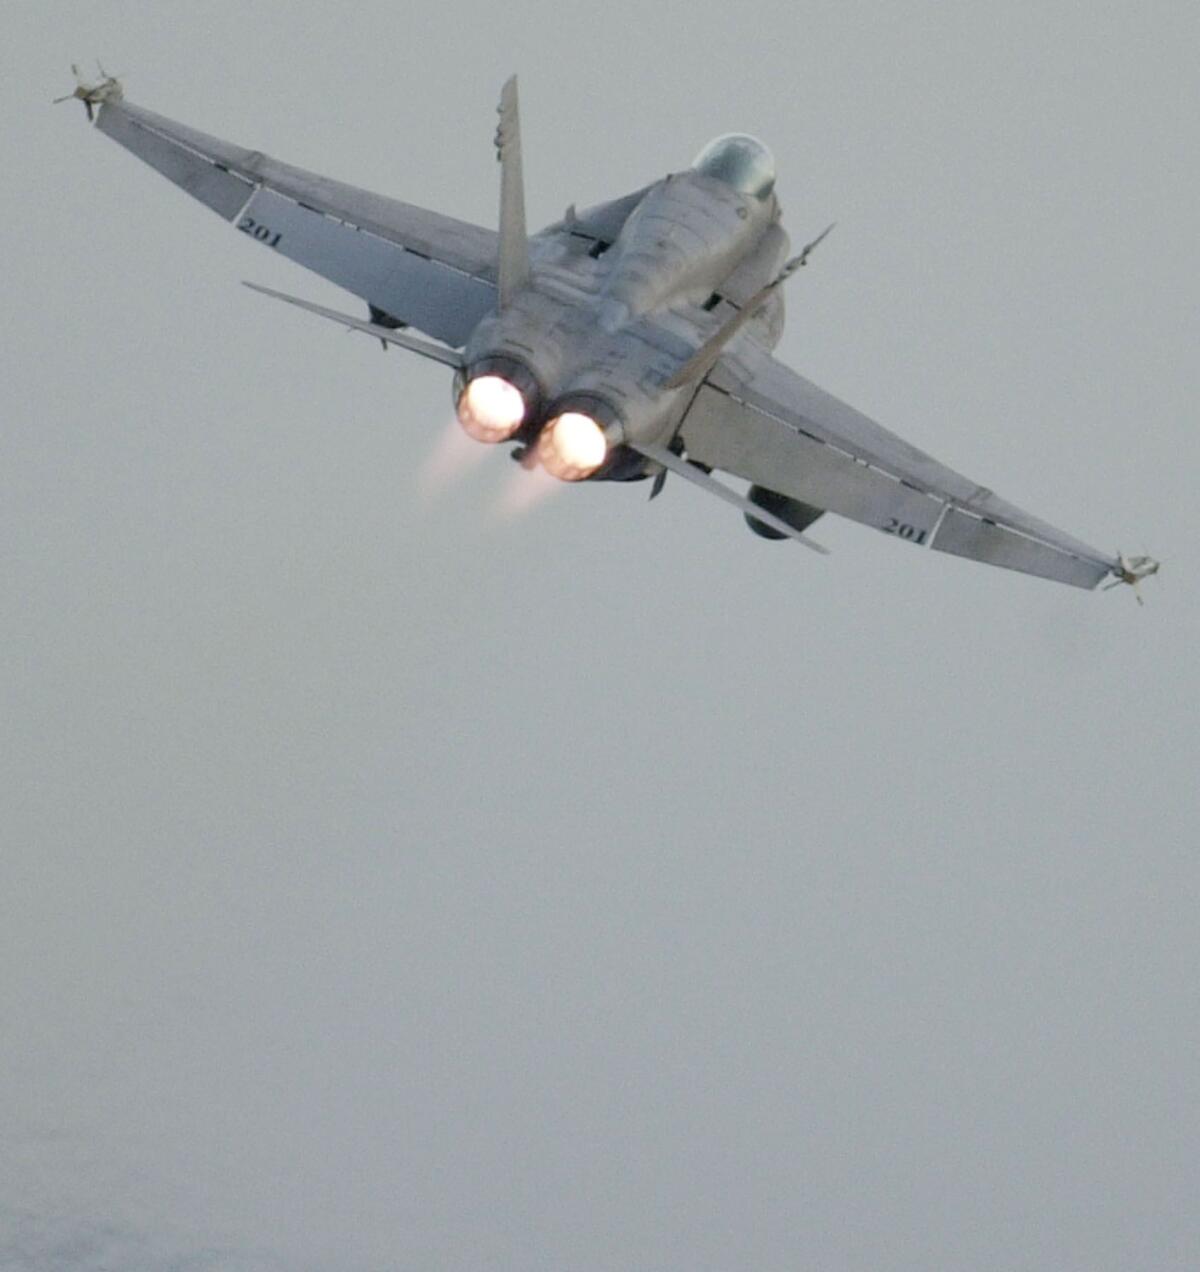 A Navy F/A-18C Hornet takes off on a strike mission from the aircraft carrier Theodore Roosevelt in the Arabian Sea in 2001. The pilot whom authorities are searching for in Nevada was flying a similar craft.